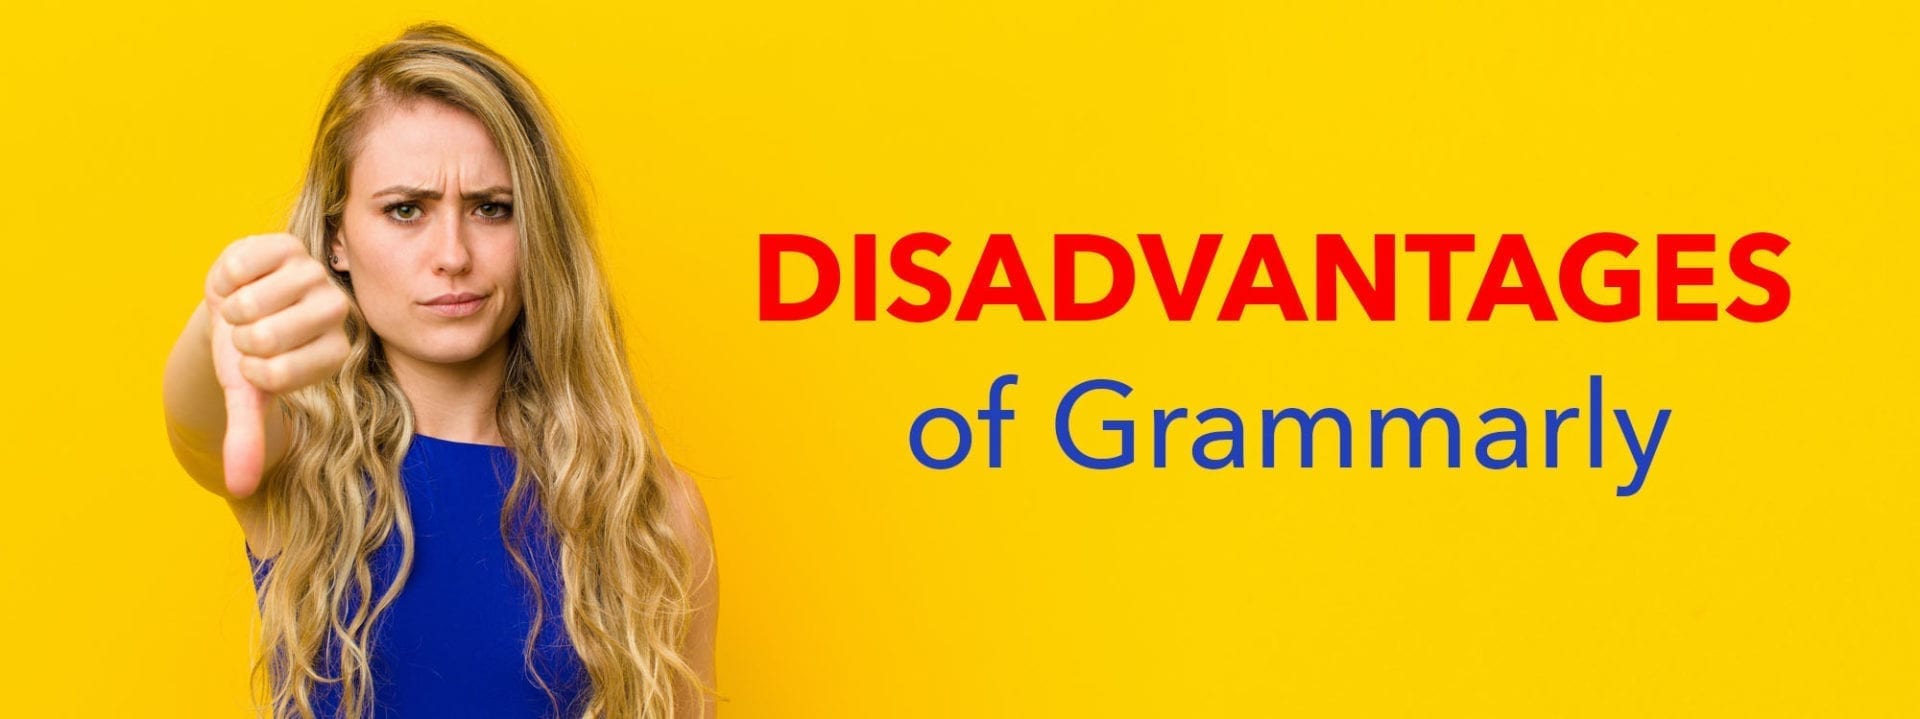 Disadvantages of Grammarly